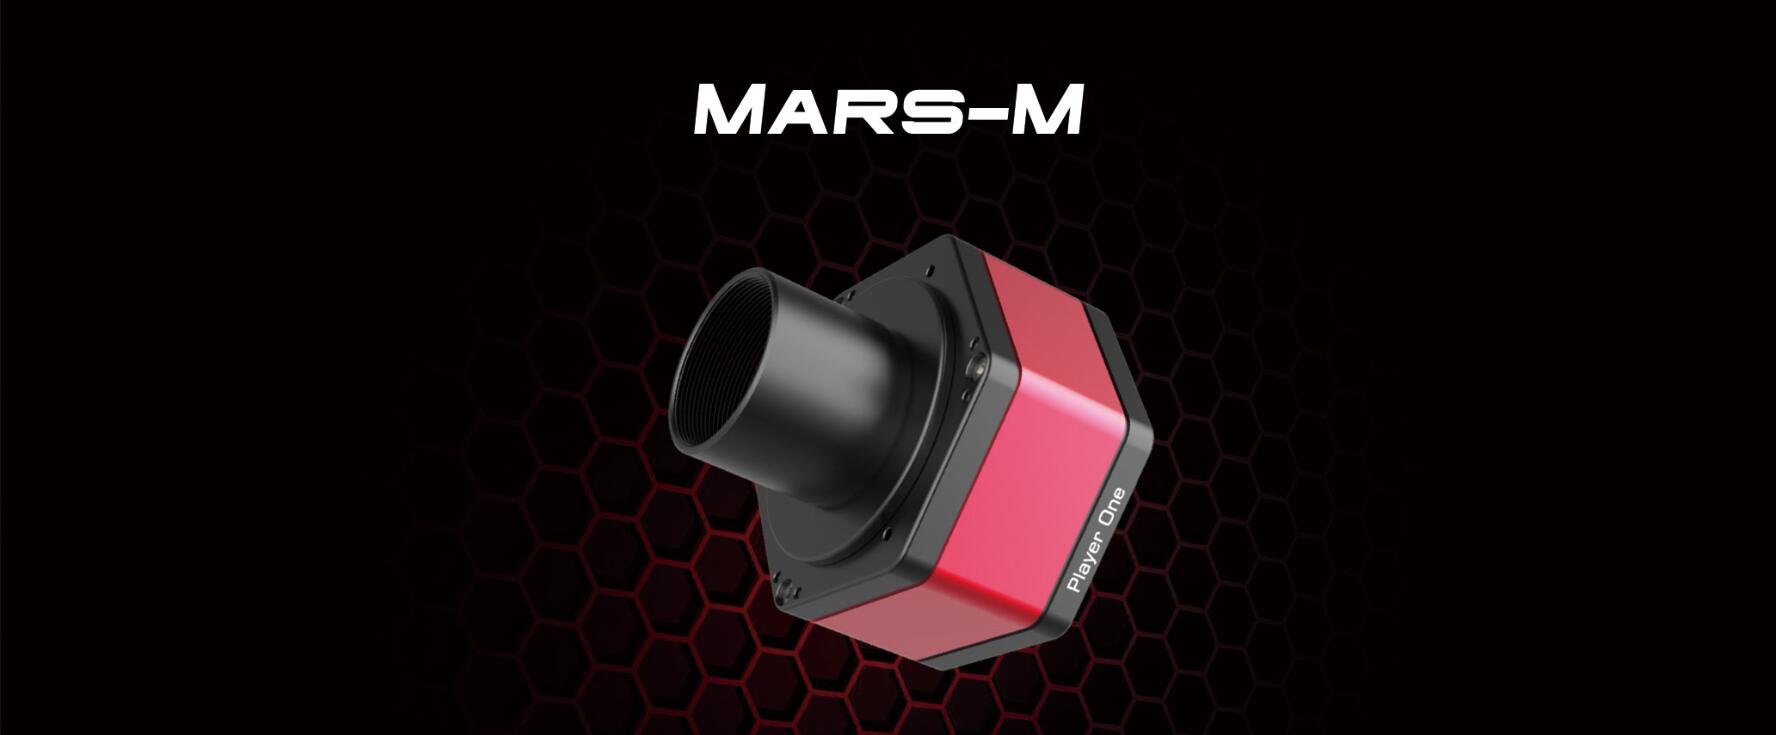 Mars-M Camera (IMX290) released in January